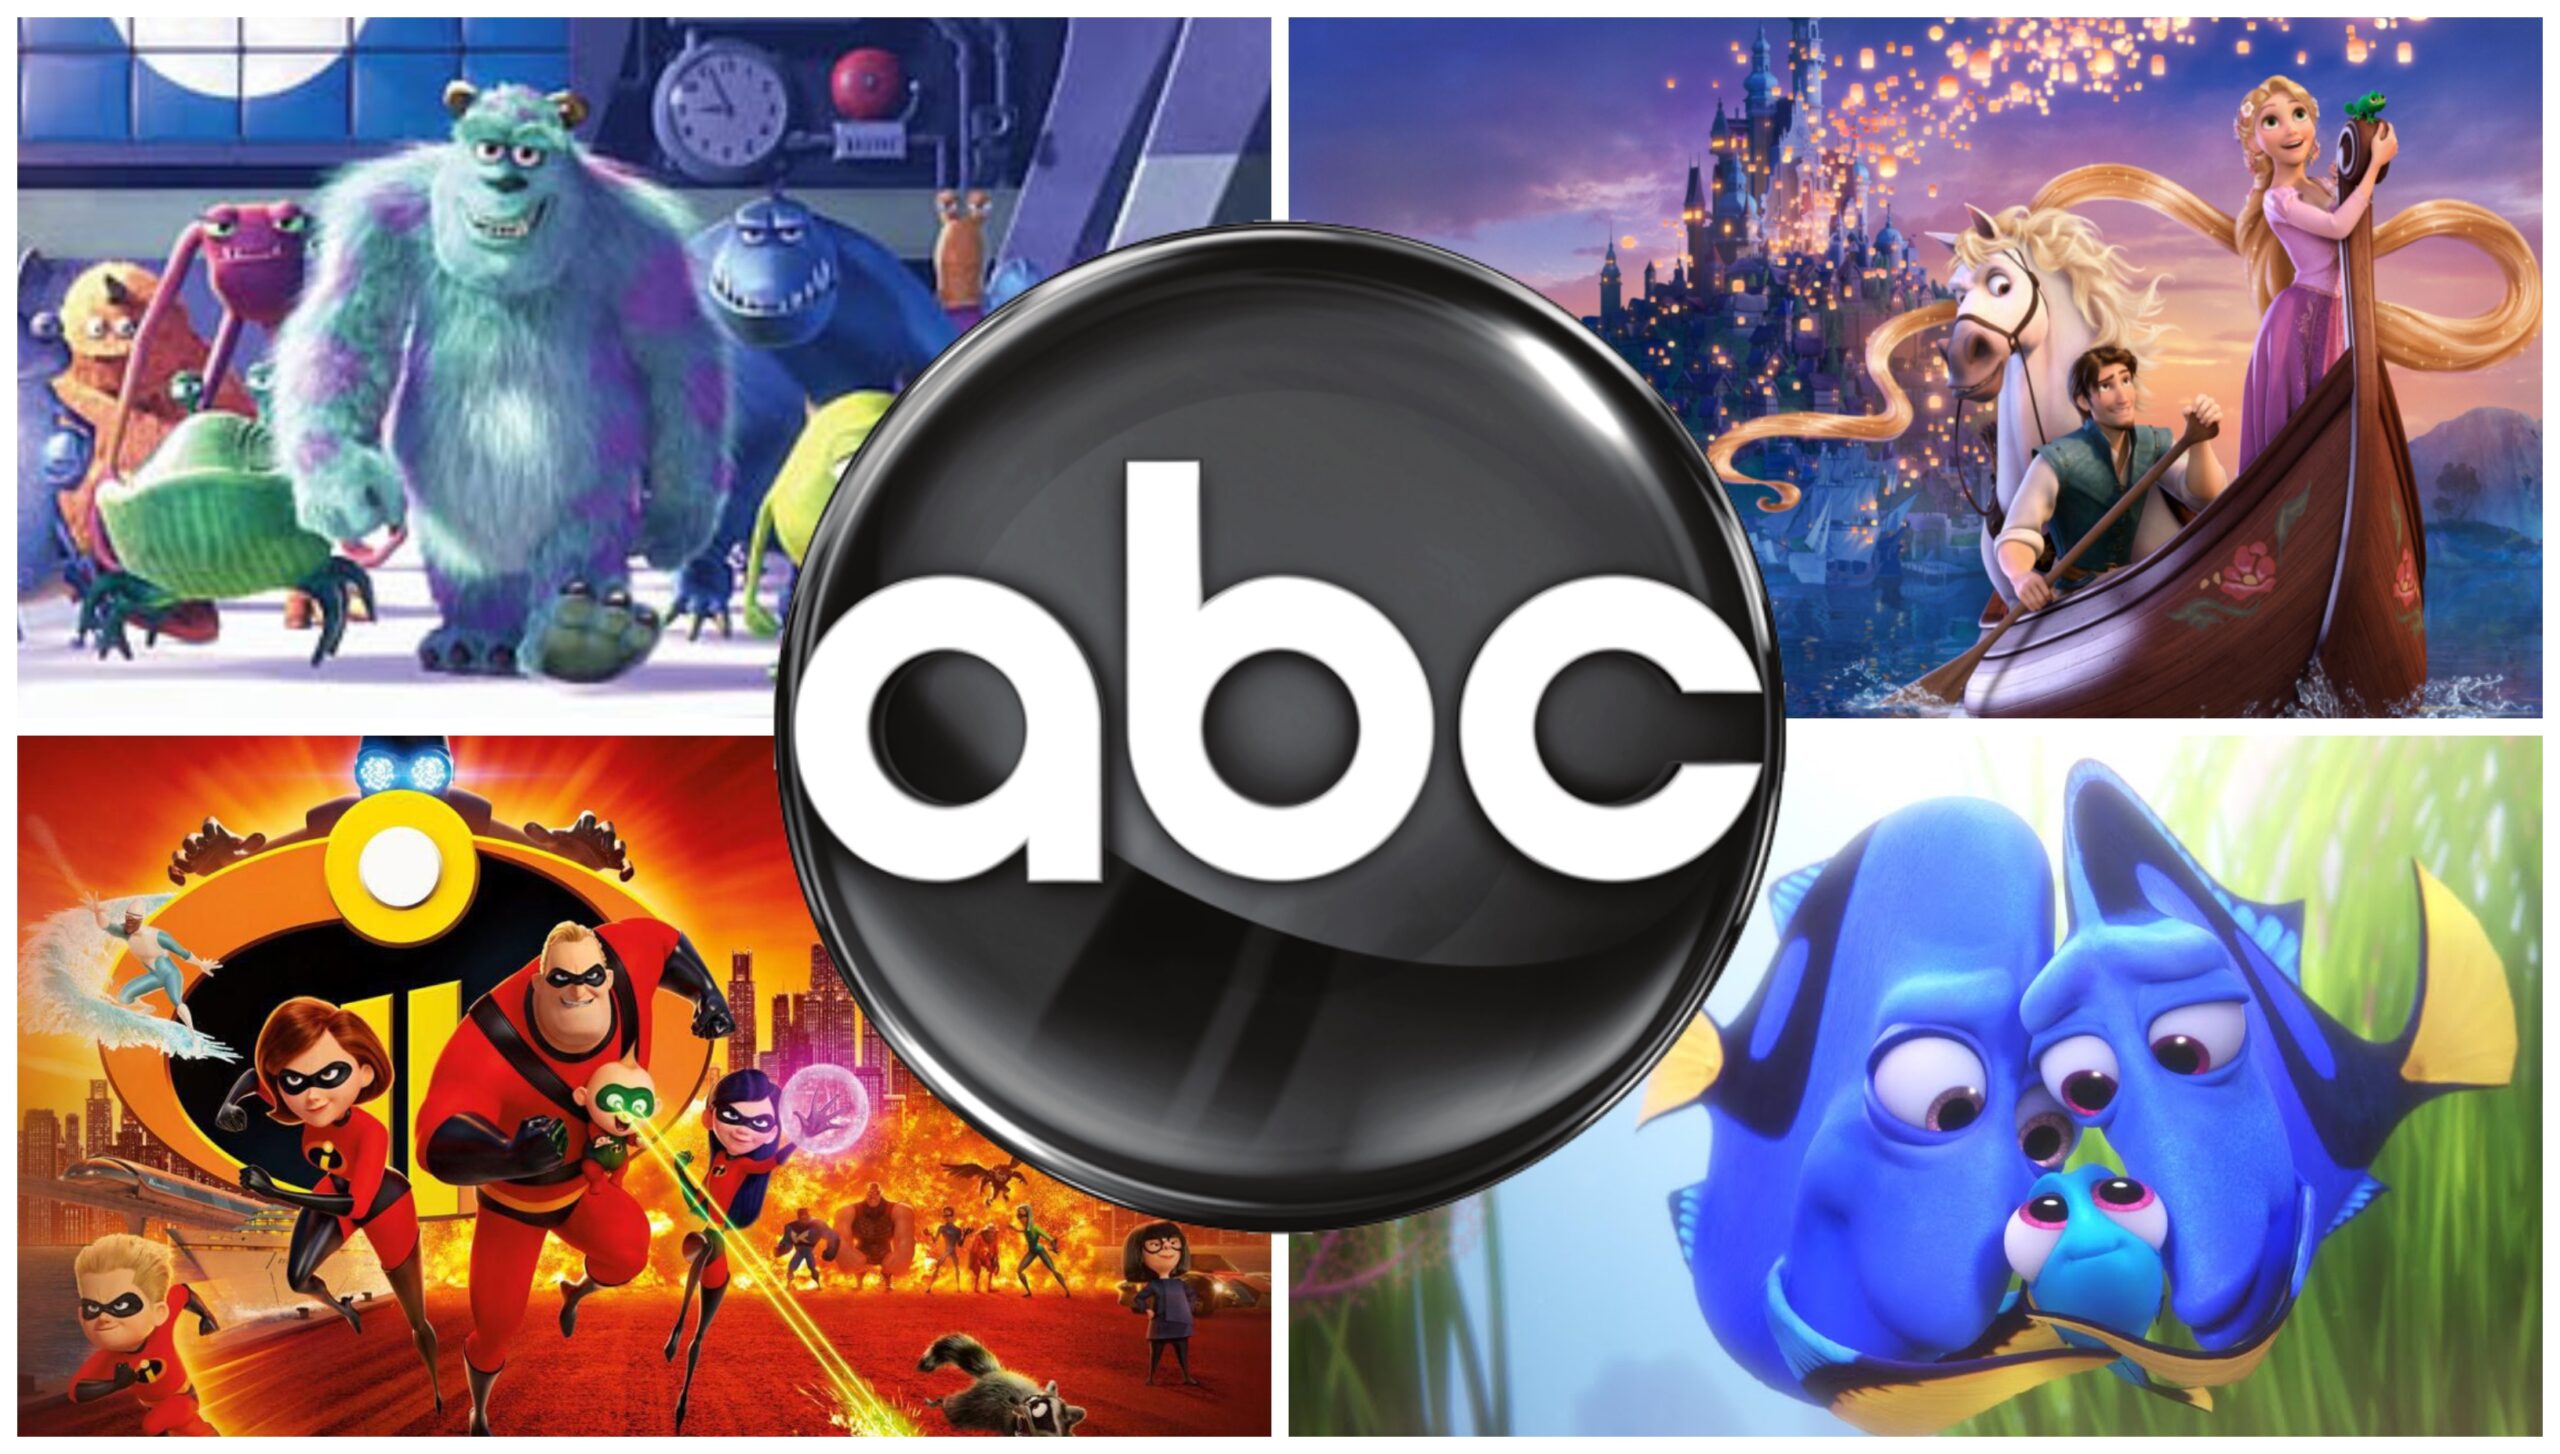 'The Wonderful World of Disney' Returns This May on ABC Chip and Company